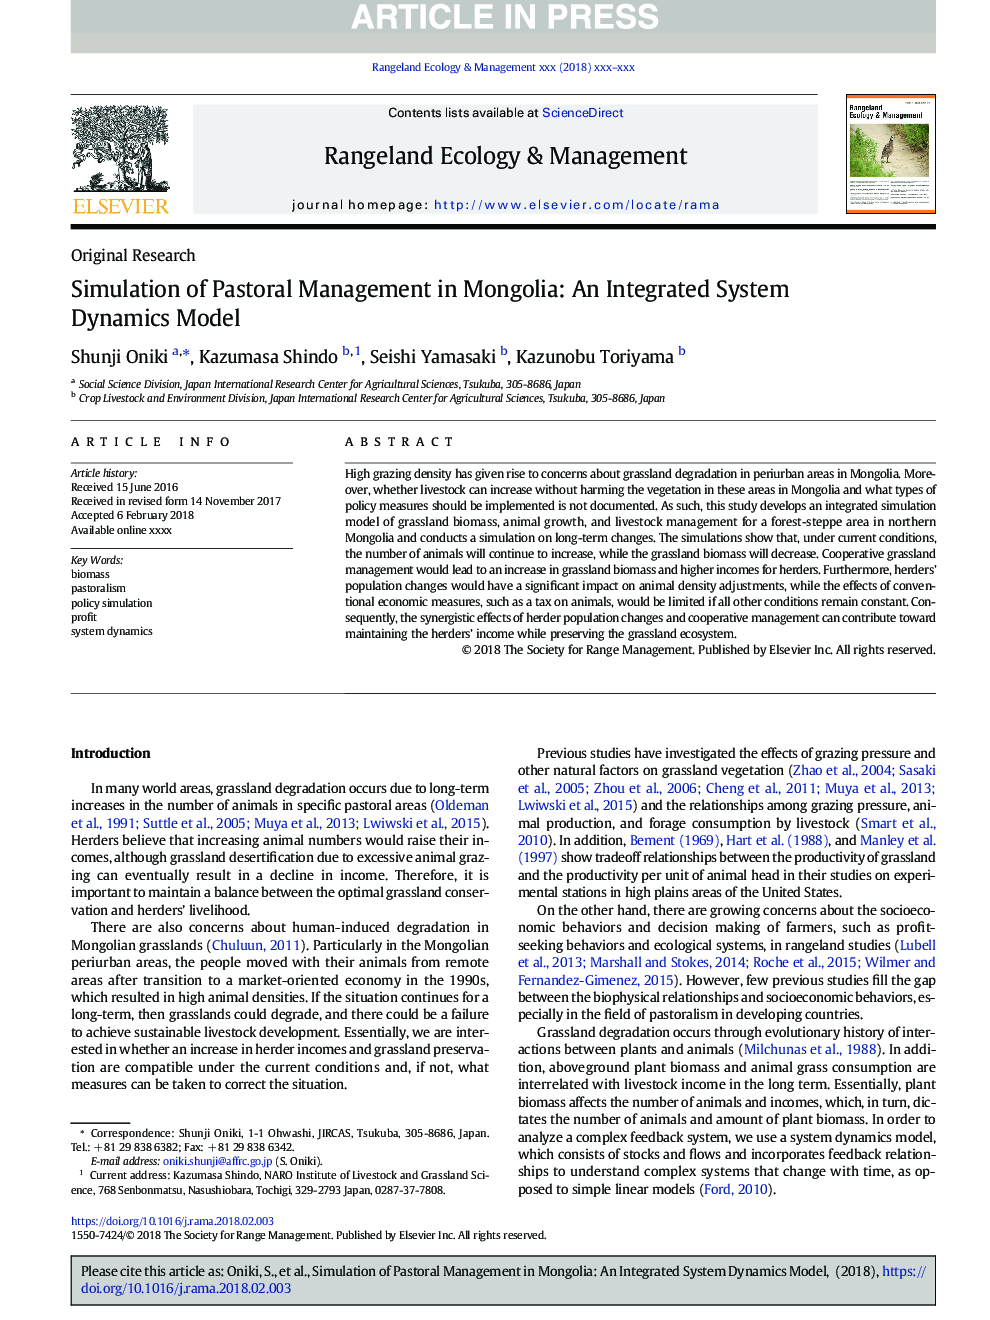 Simulation of Pastoral Management in Mongolia: An Integrated System Dynamics Model